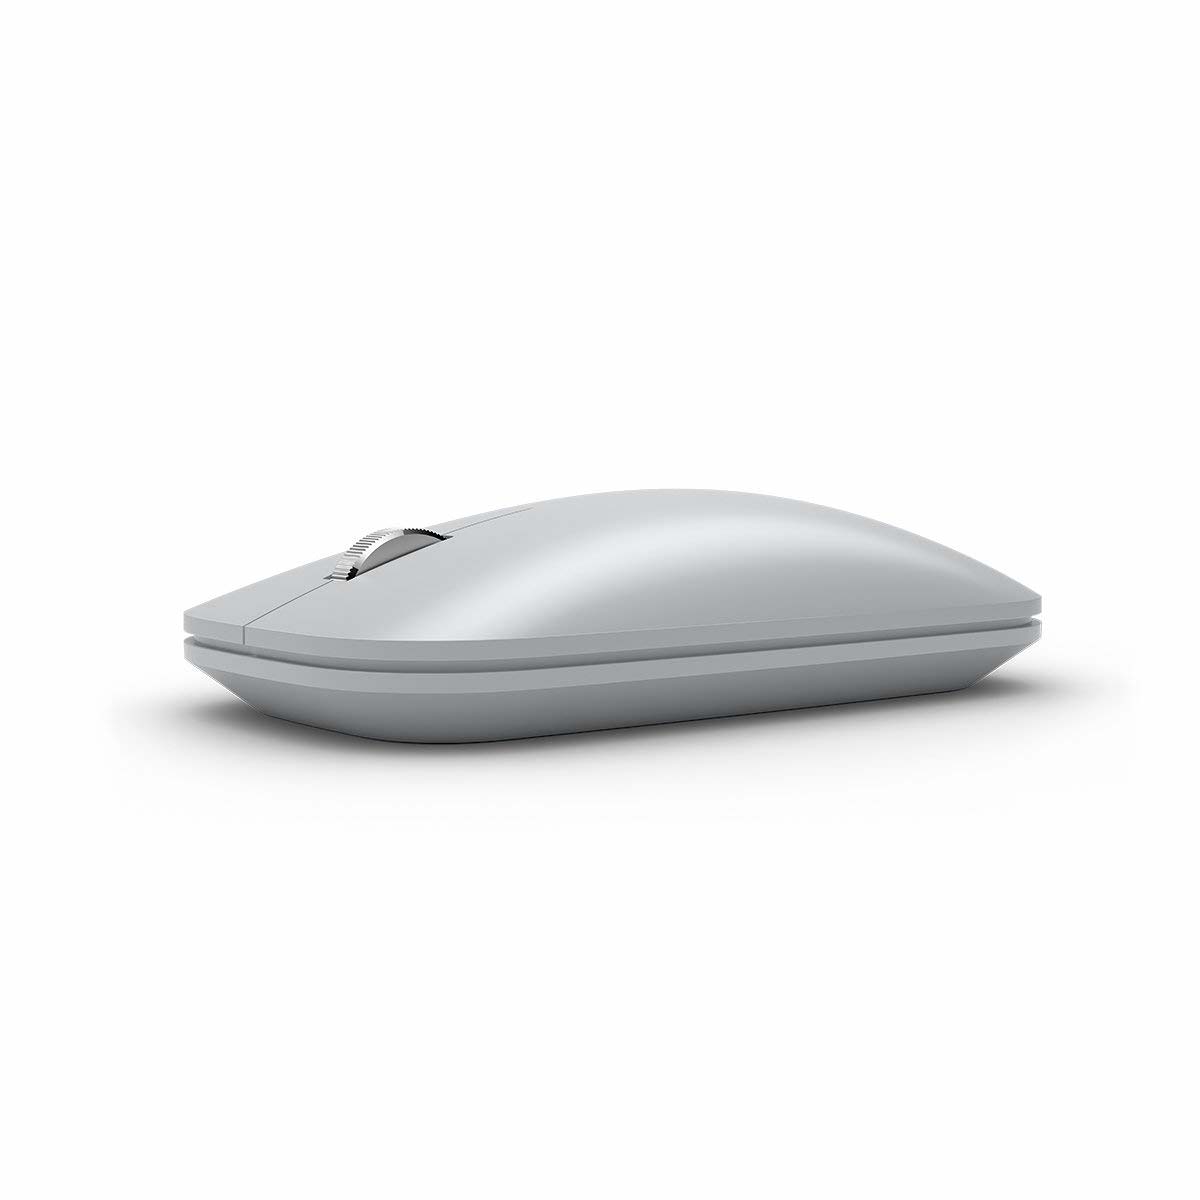 Microsoft Surface Mobile Mouse Bluetooth, Platinum - image 3 of 5